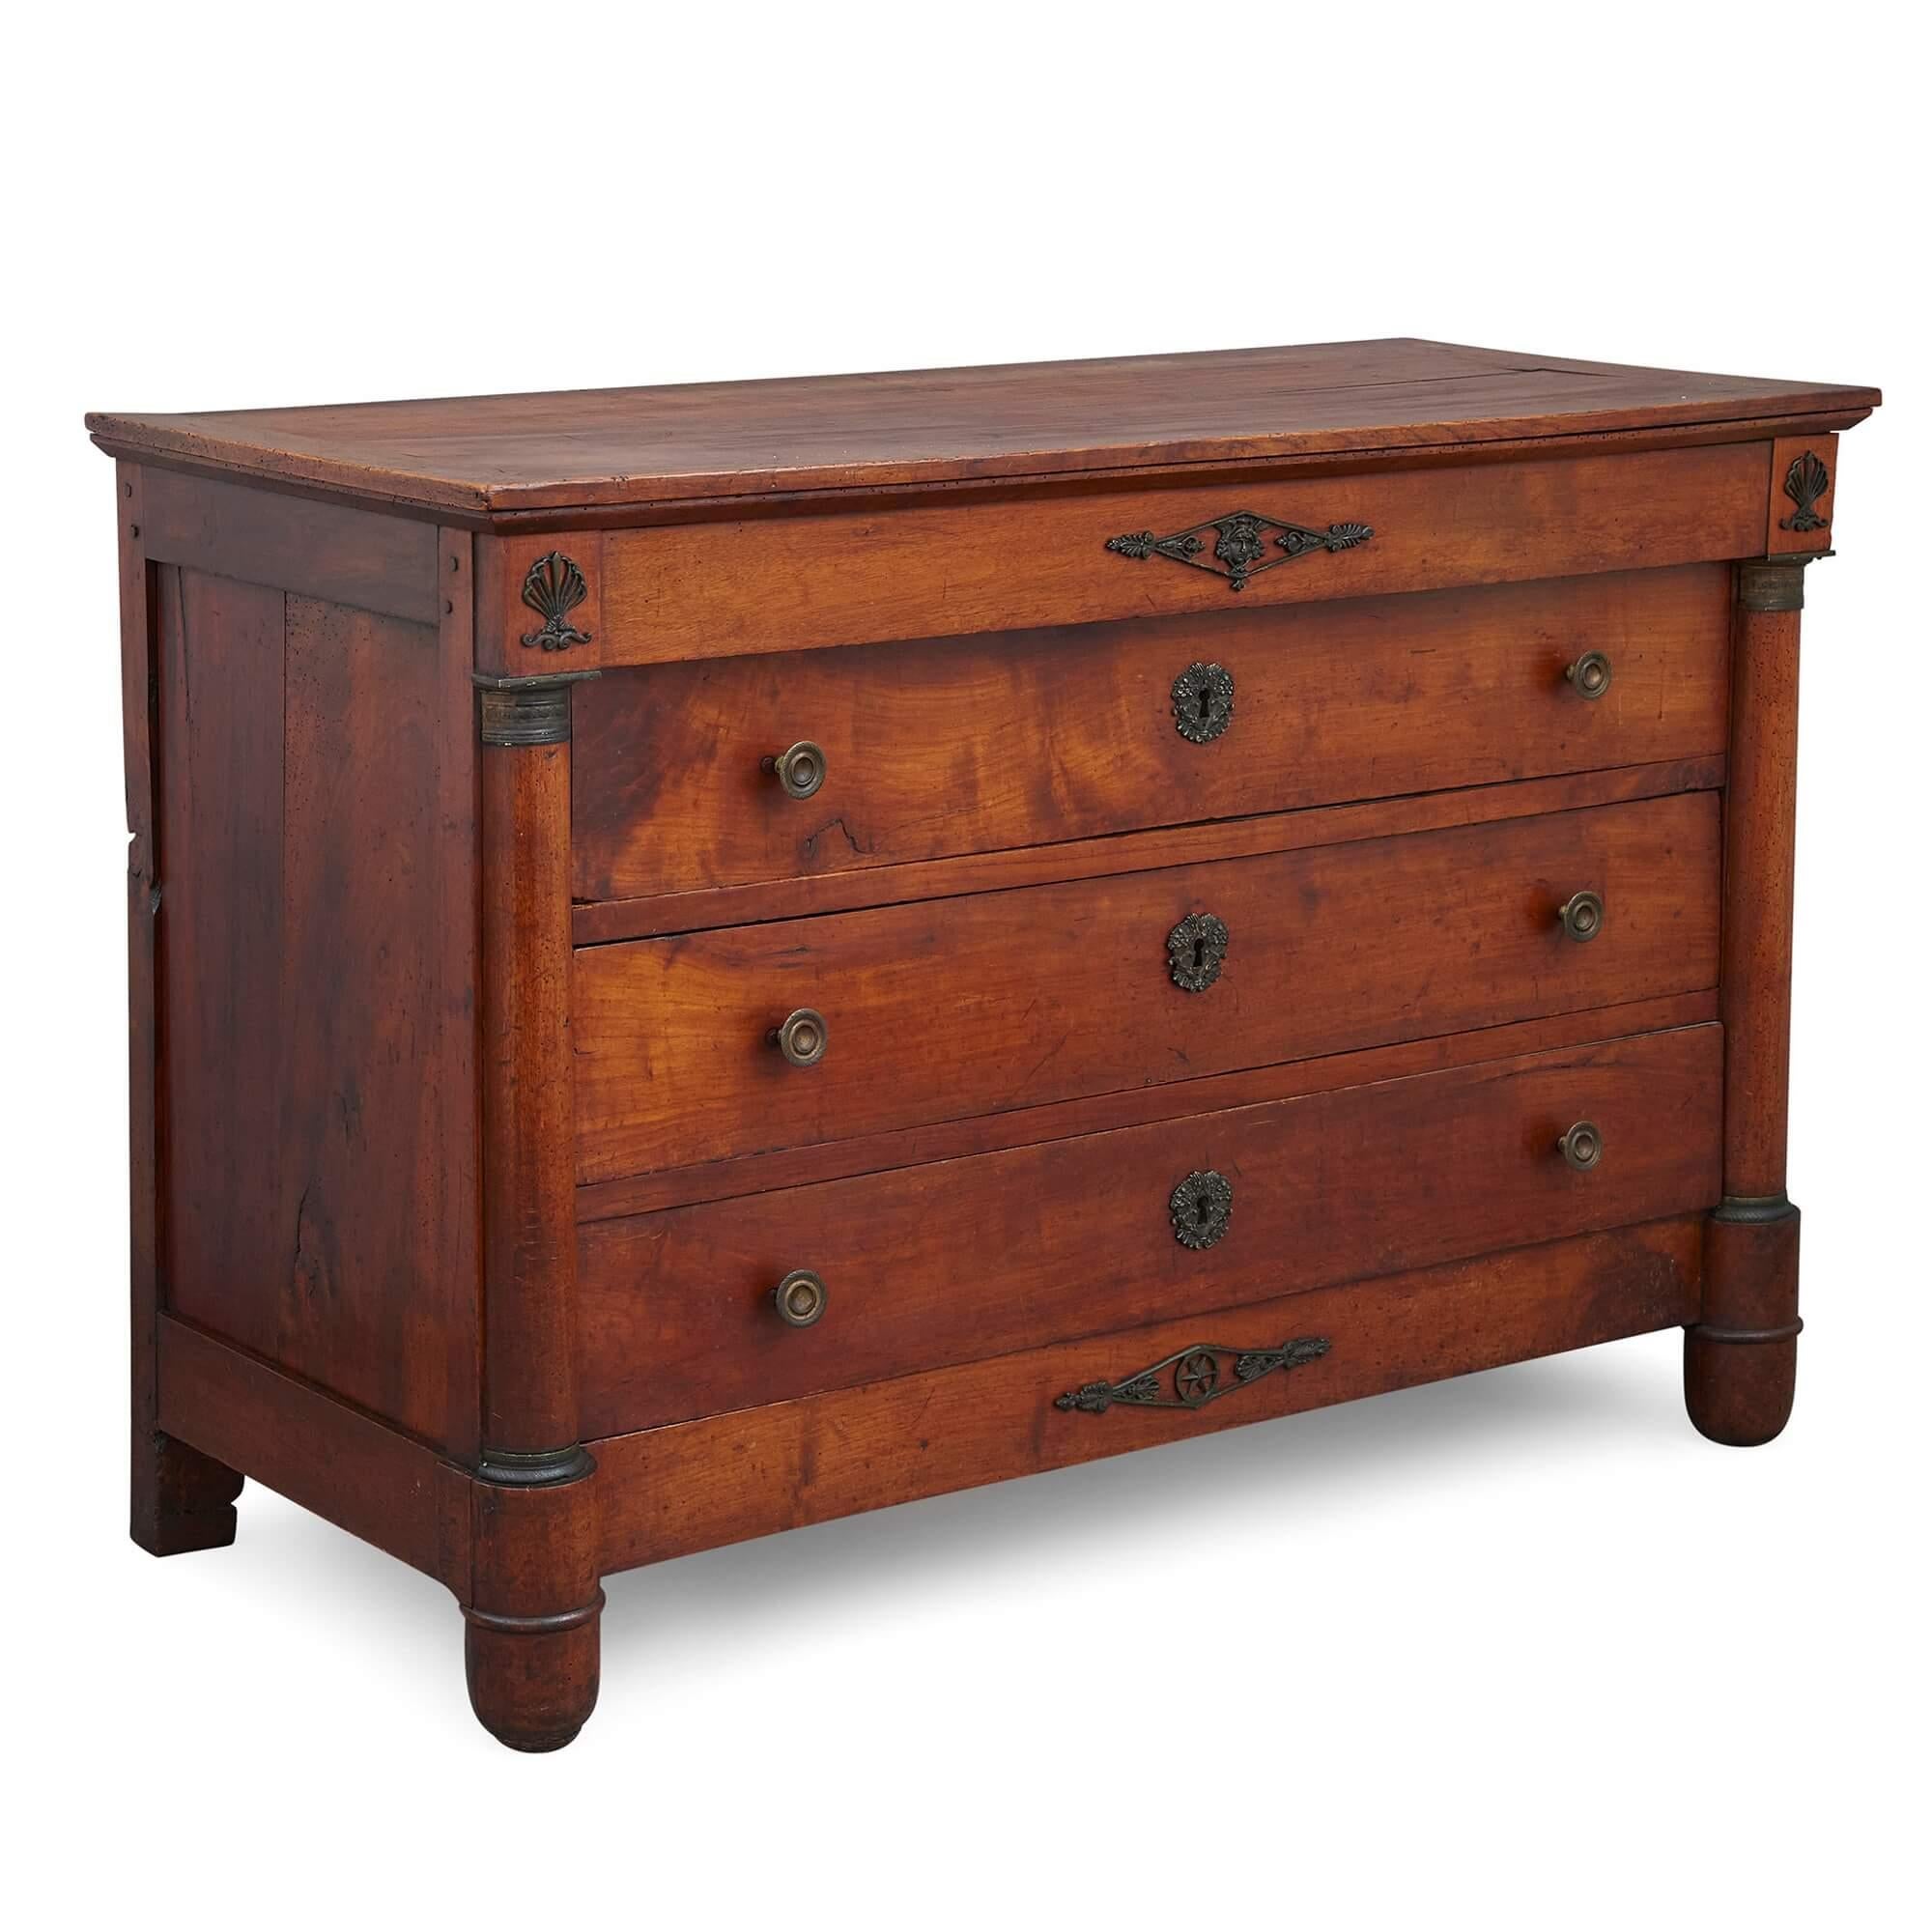 Antique French Empire style chest of drawers
French, 19th century
Measures: Height 86cm, width 127cm, depth 57cm

This beautiful chest of drawers was crafted in France in the 19th Century. It employs classical ornament sparingly and utilises the